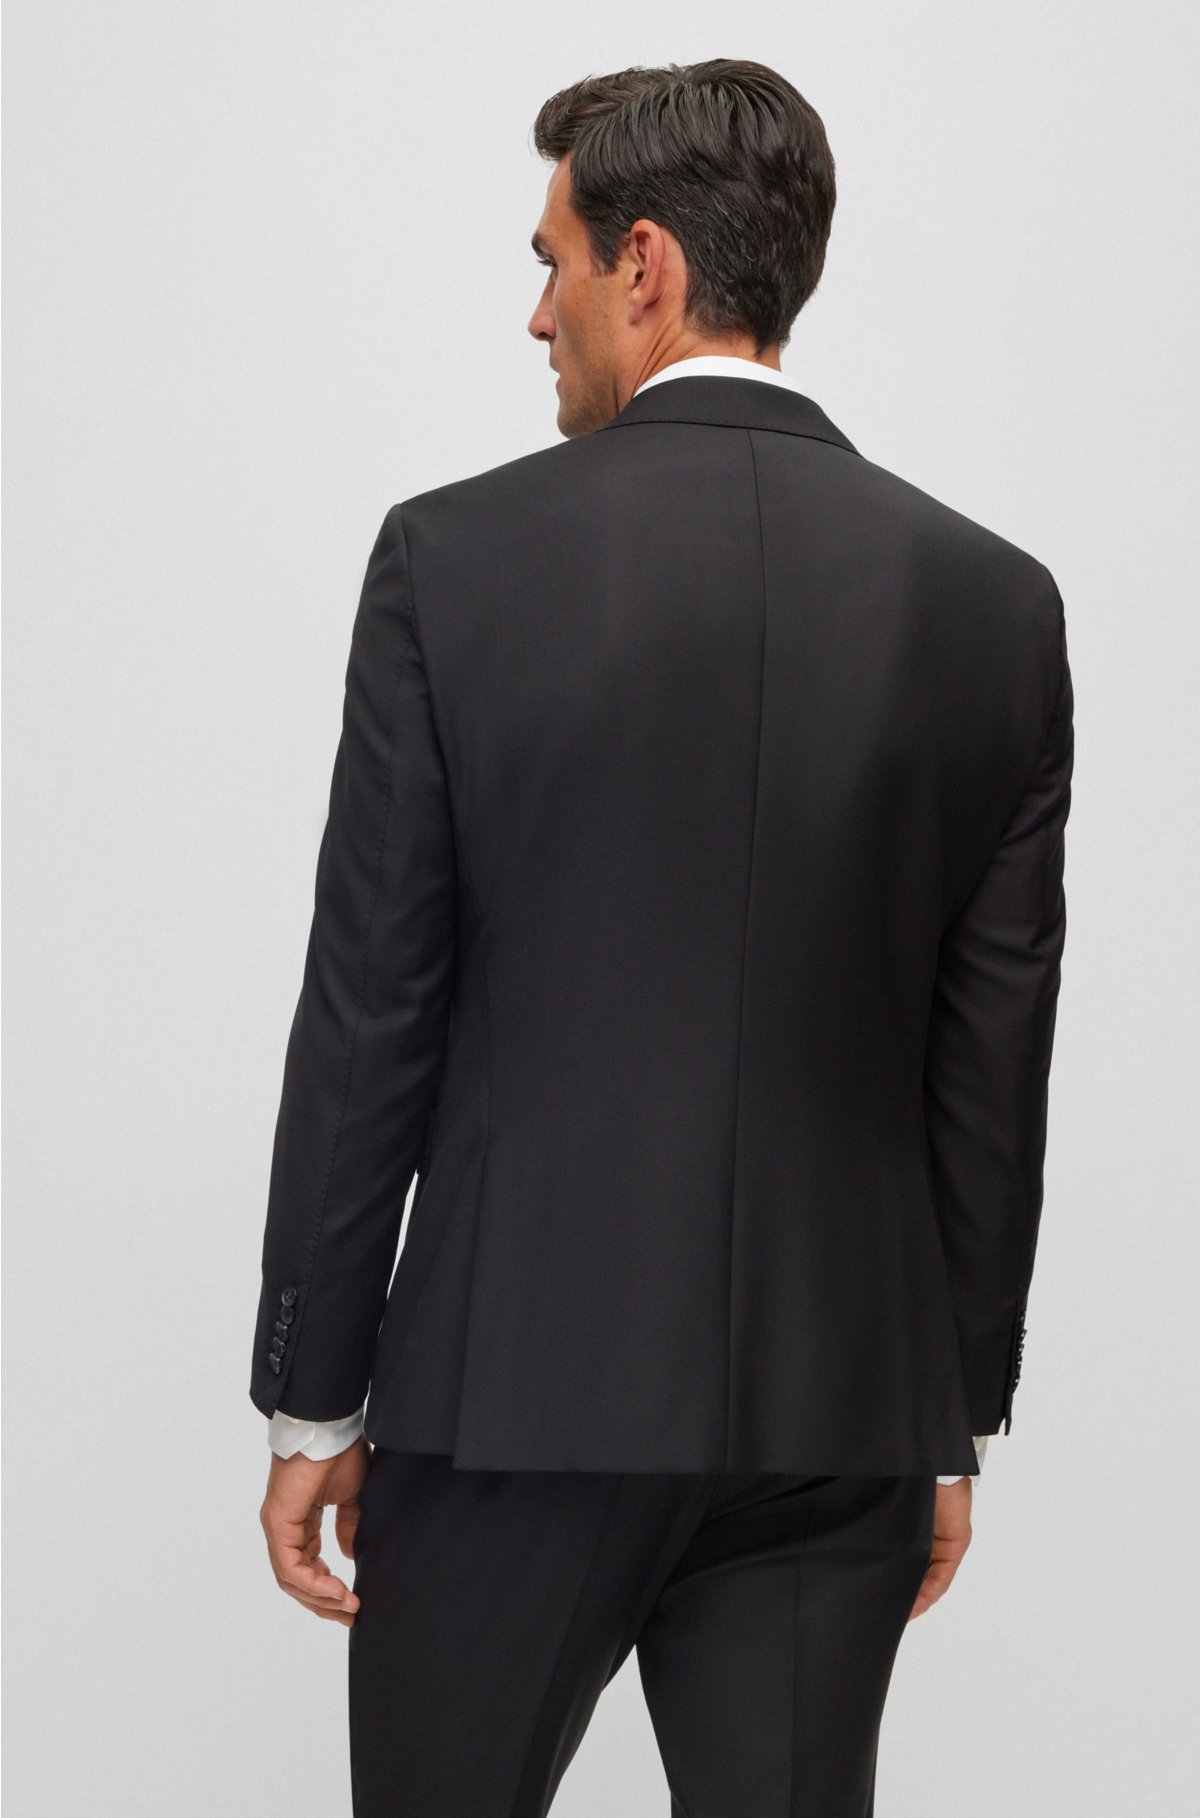 Single-breasted jacket in stretch wool, Black